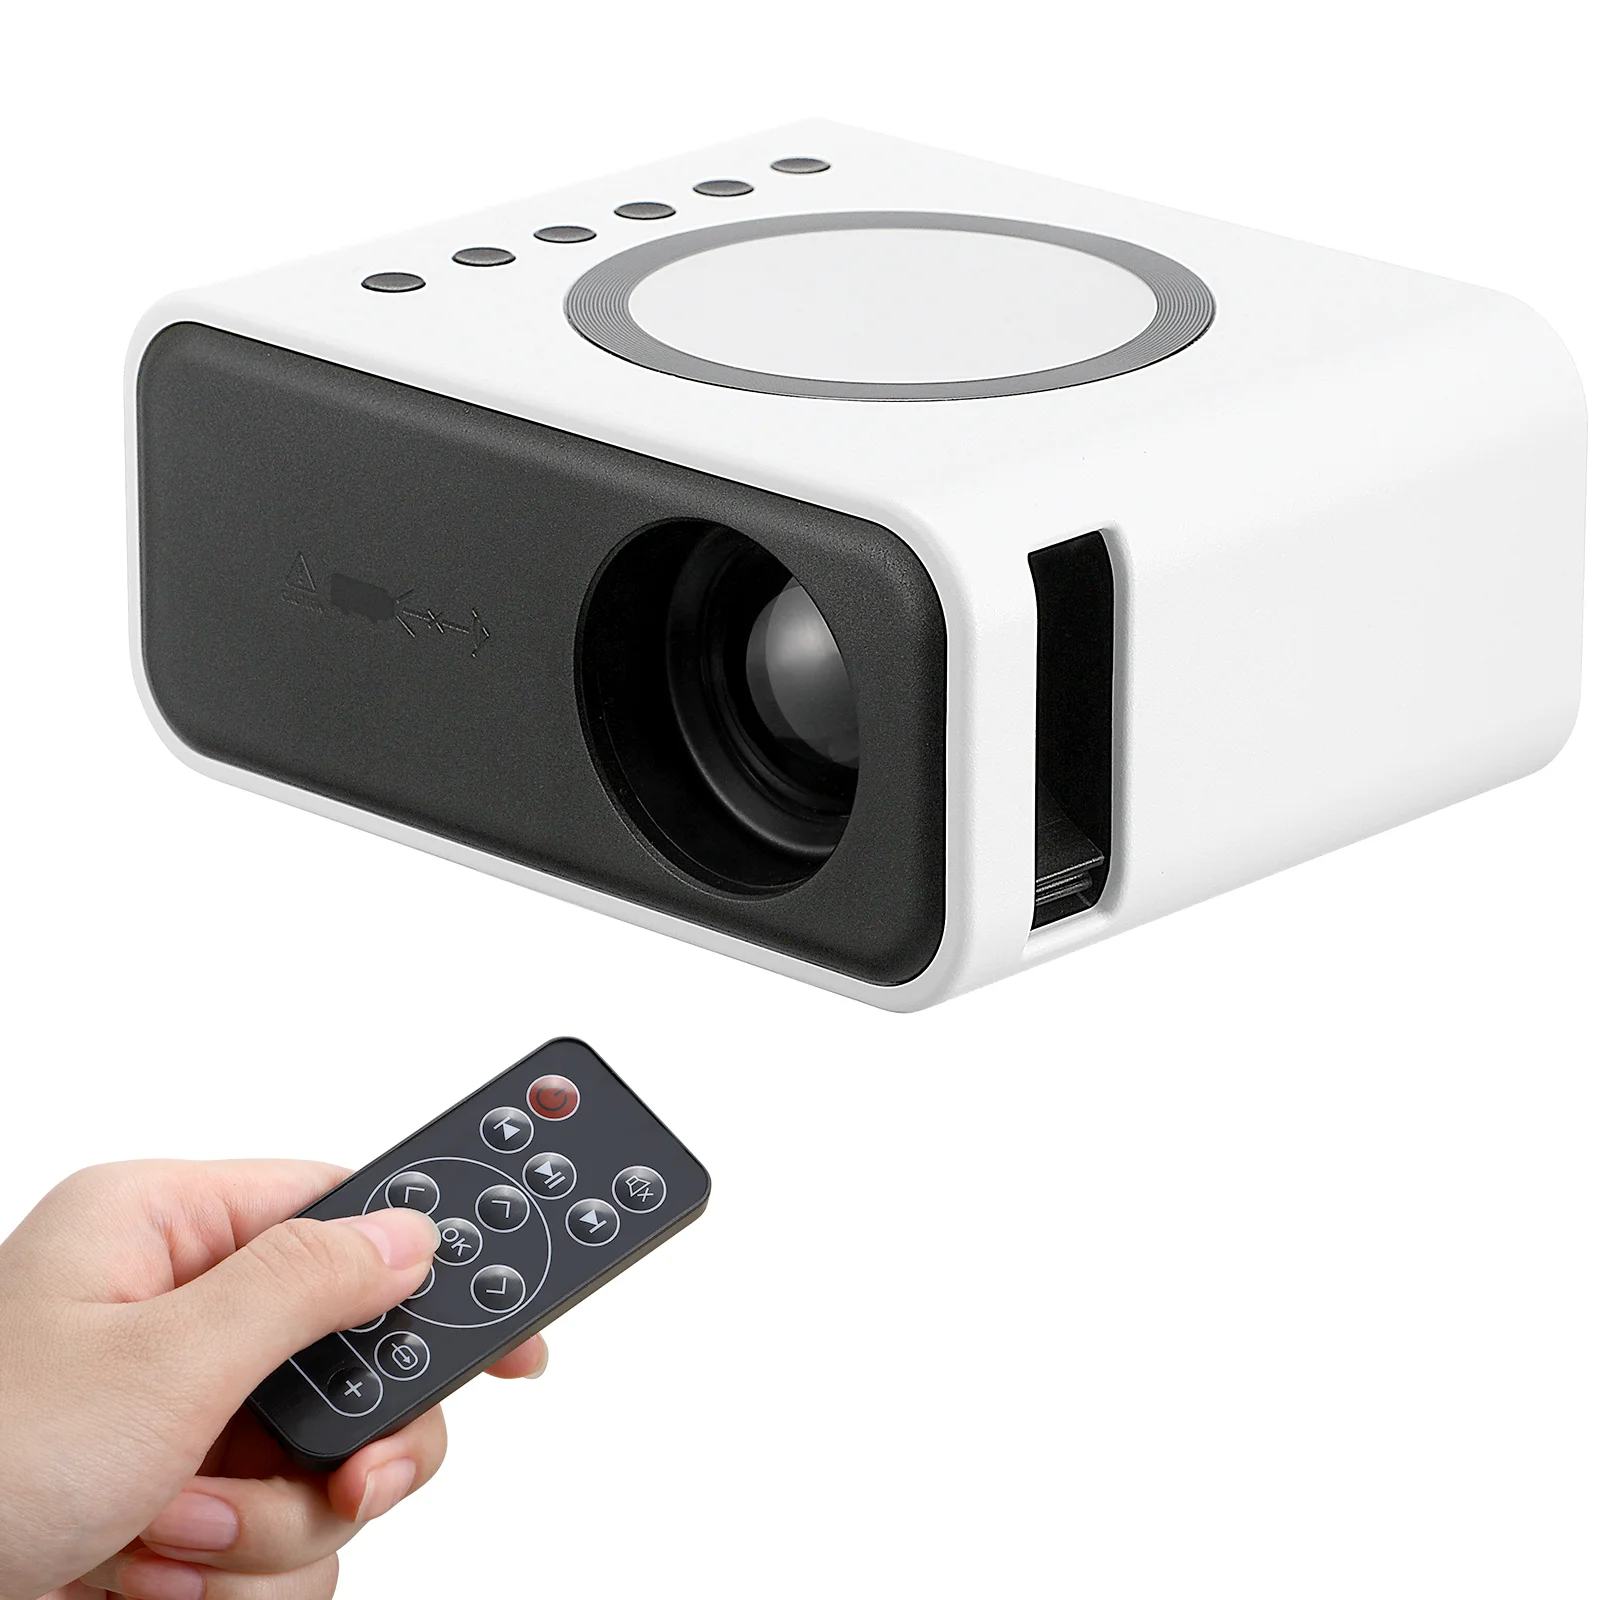 

Small Projector High Definition Video Projector Household Theater System Supply(AU Plug)